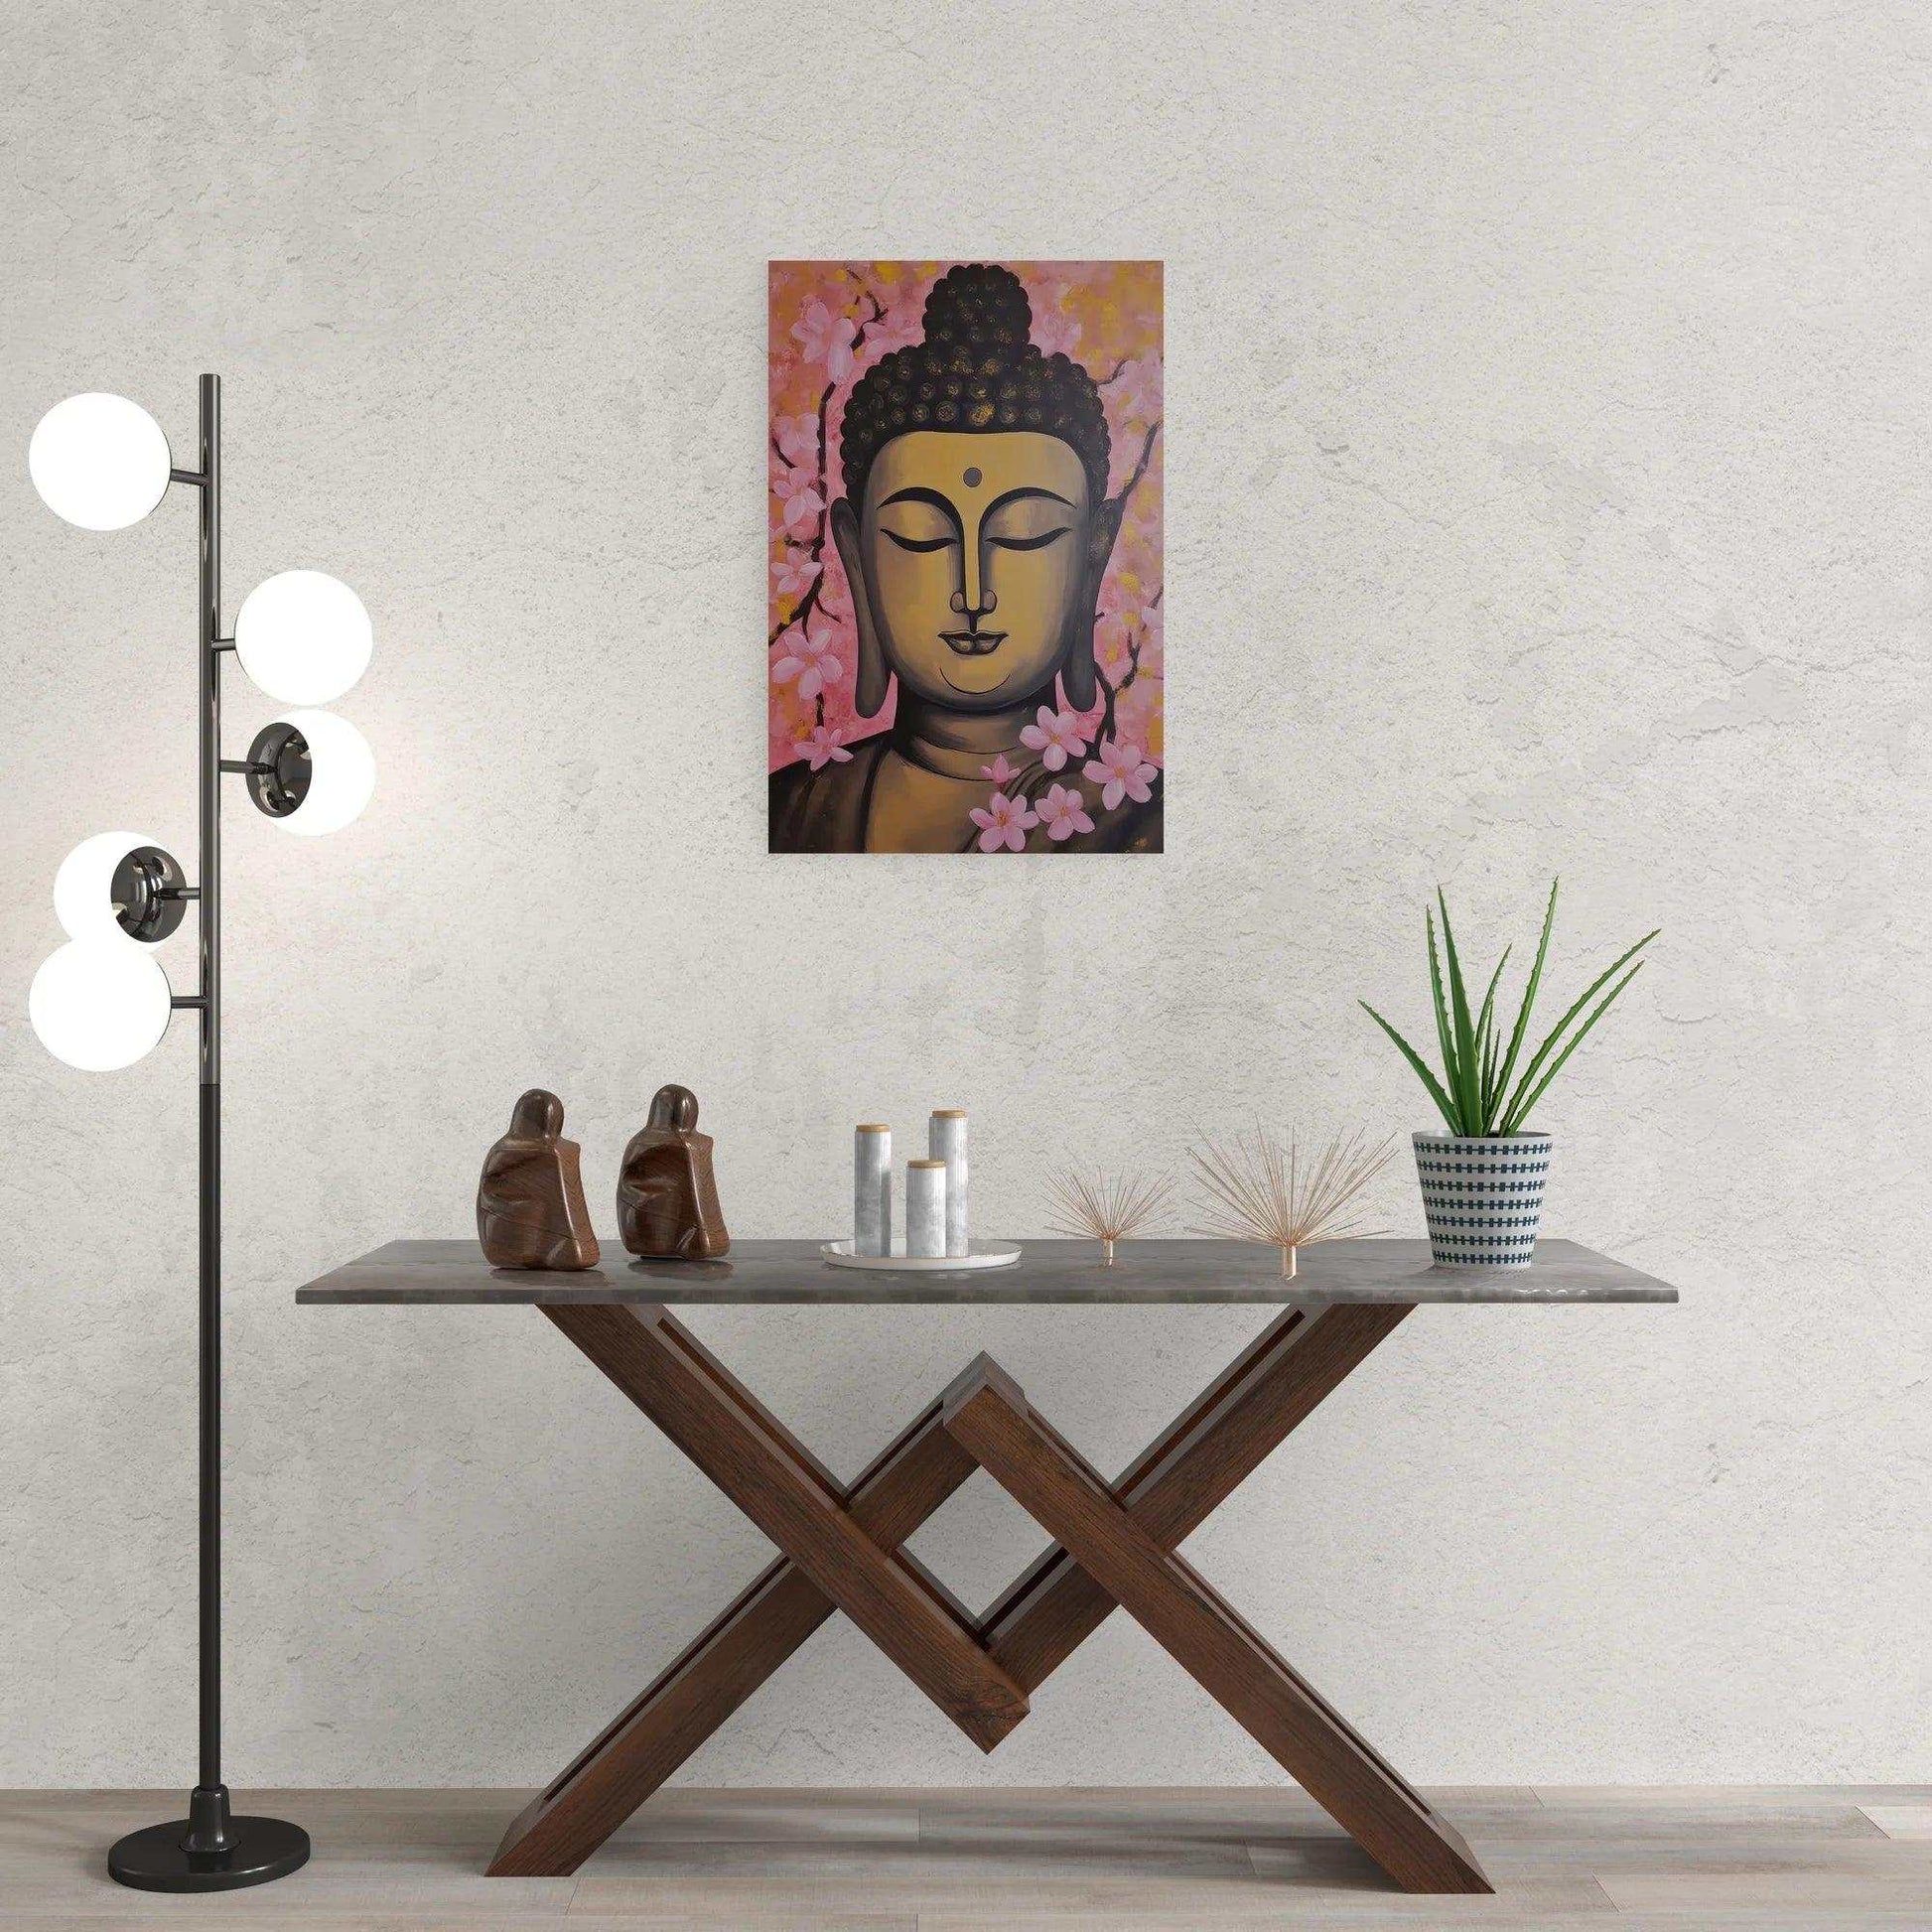 Contemporary space with a calming Buddha painting adorned with pink blossoms on a textured white wall, flanked by a stylish floor lamp with spherical bulbs, above a dark wood console table with decorative items and a potted plant, creating a balanced and tranquil ambiance.